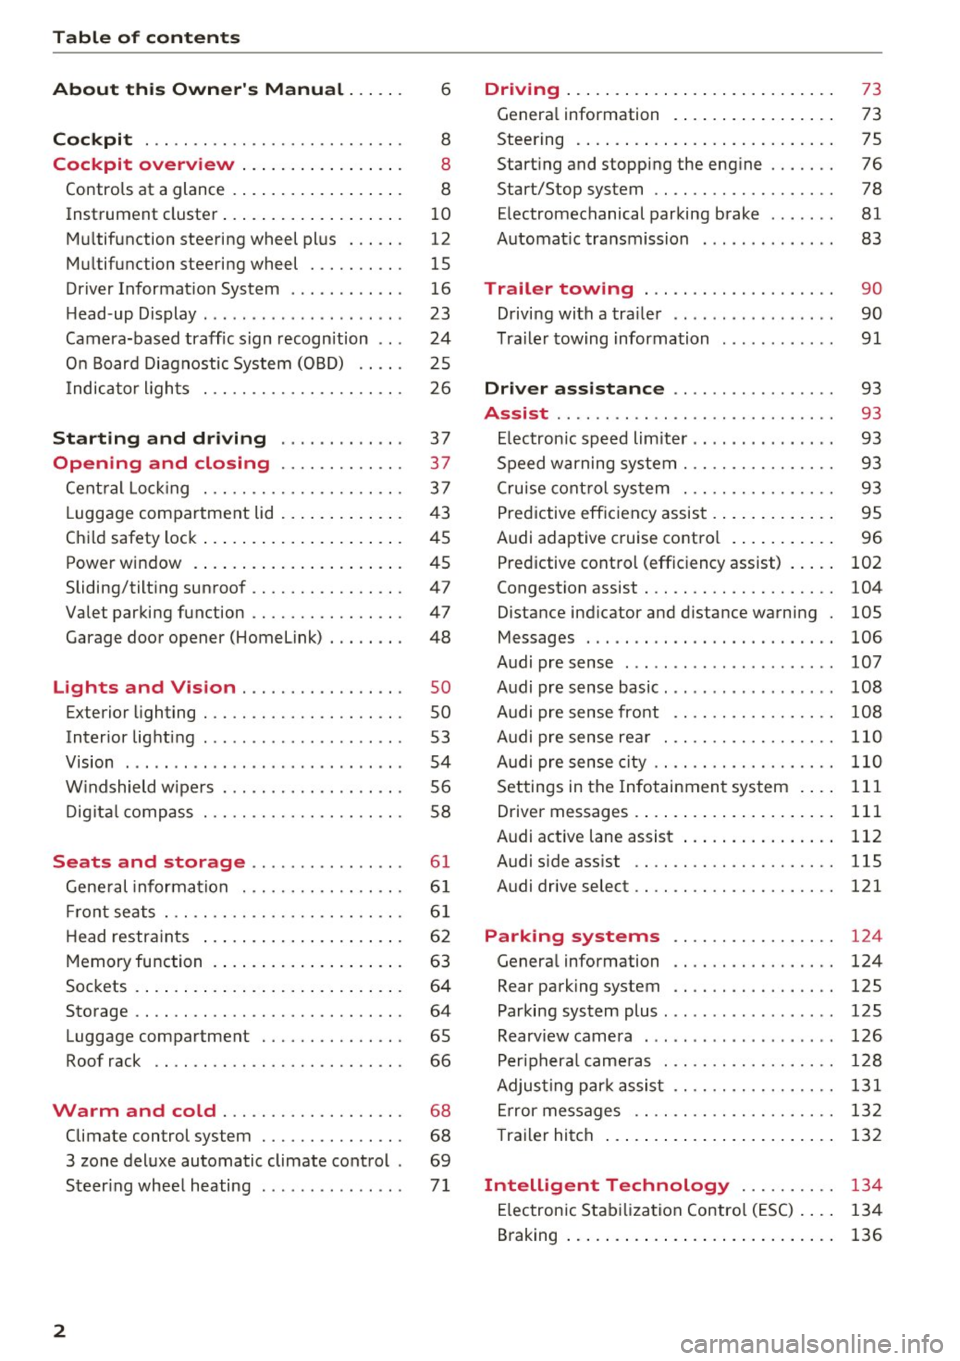 AUDI A4 2017  Owners Manual Table  of  contents 
About  this  Owners  Manual  ... .. . 
Cockpit  ... .. ............... .... ..  . 
Cockpit  overview  ................ . 
Controls  at  a glance  ... .......... .. .. . 
Instrume